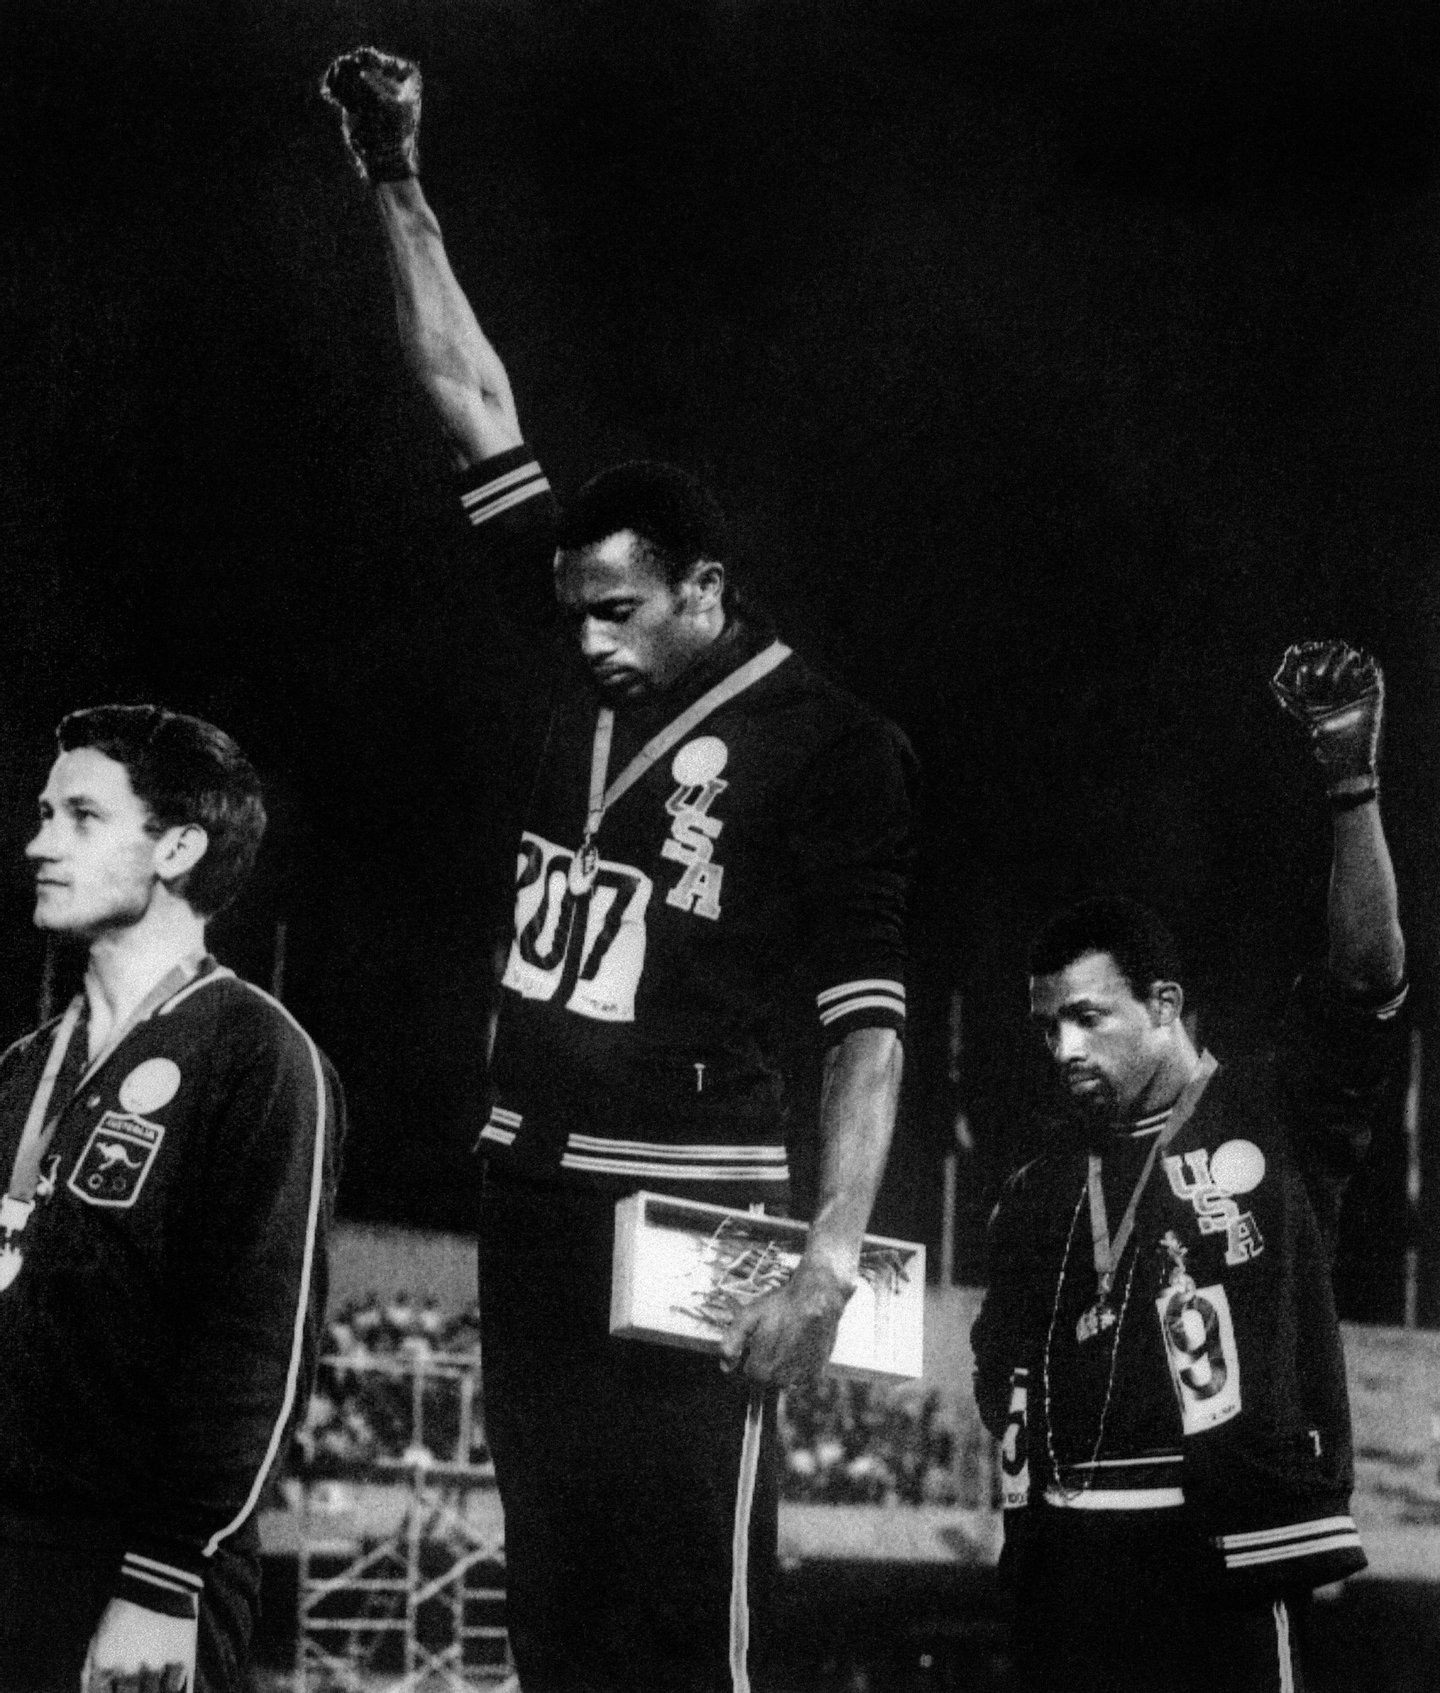 US athletes Tommie Smith (C) and John Carlos (R) raise their gloved fists in the Black Power salute to express their opposition to racism in the USA during the US national anthem, after receiving their medals 17 October 1968 for first and third place in the men's 200m event at the Mexico Olympic Games. At left is Peter Norman of Australia who took second place. (Photo credit should read OFF/AFP/Getty Images)